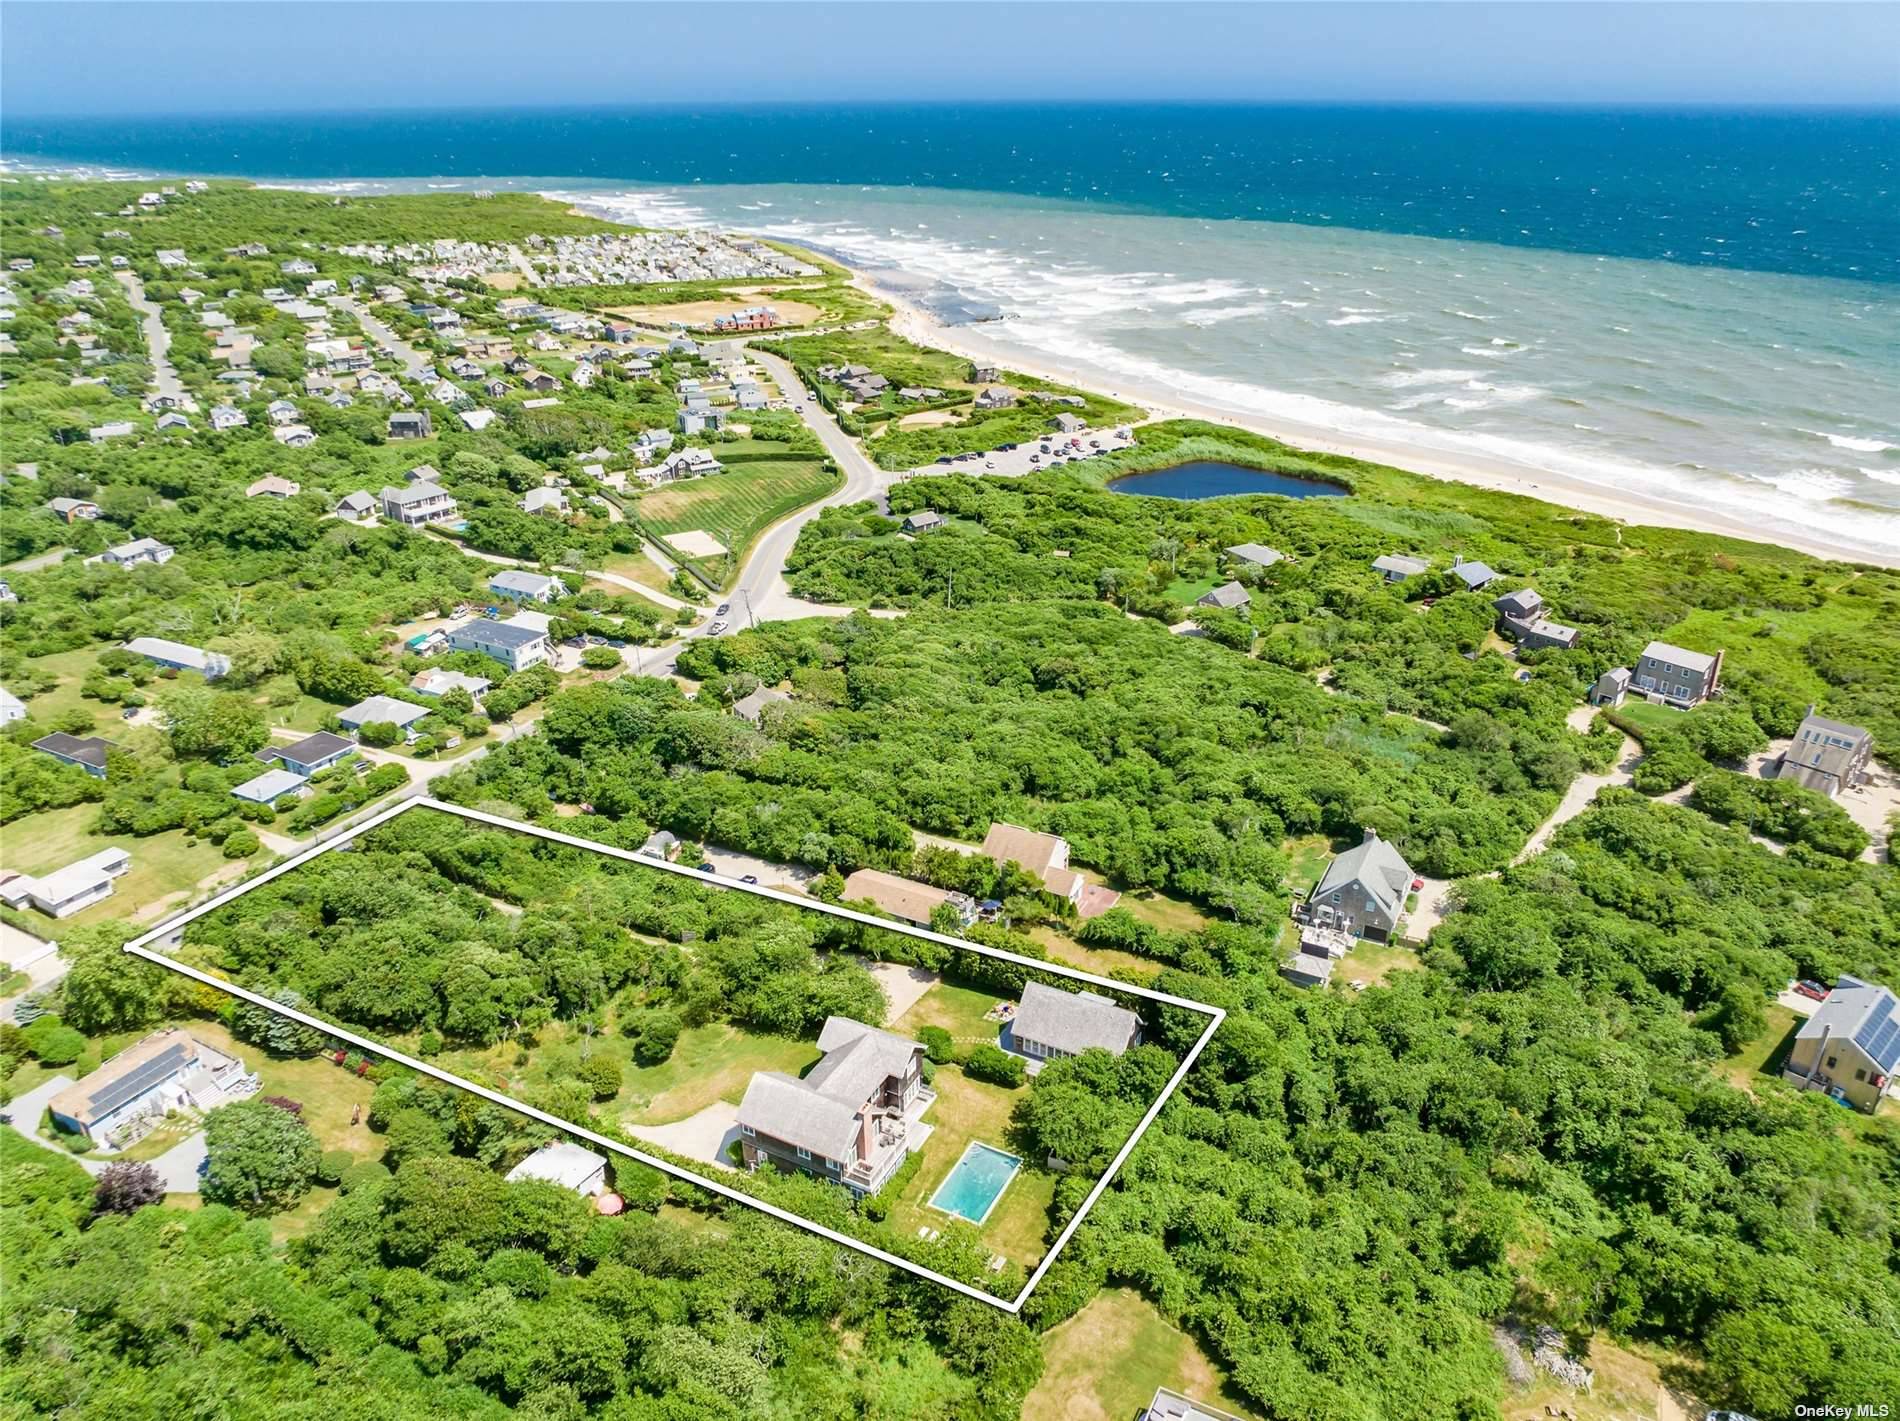 Ditch Plains Coastal Retreat This is the ultimate opportunity to own two contiguous single and separate properties in the coveted surf Mecca of Ditch Plains Beach in Montauk a dream ...